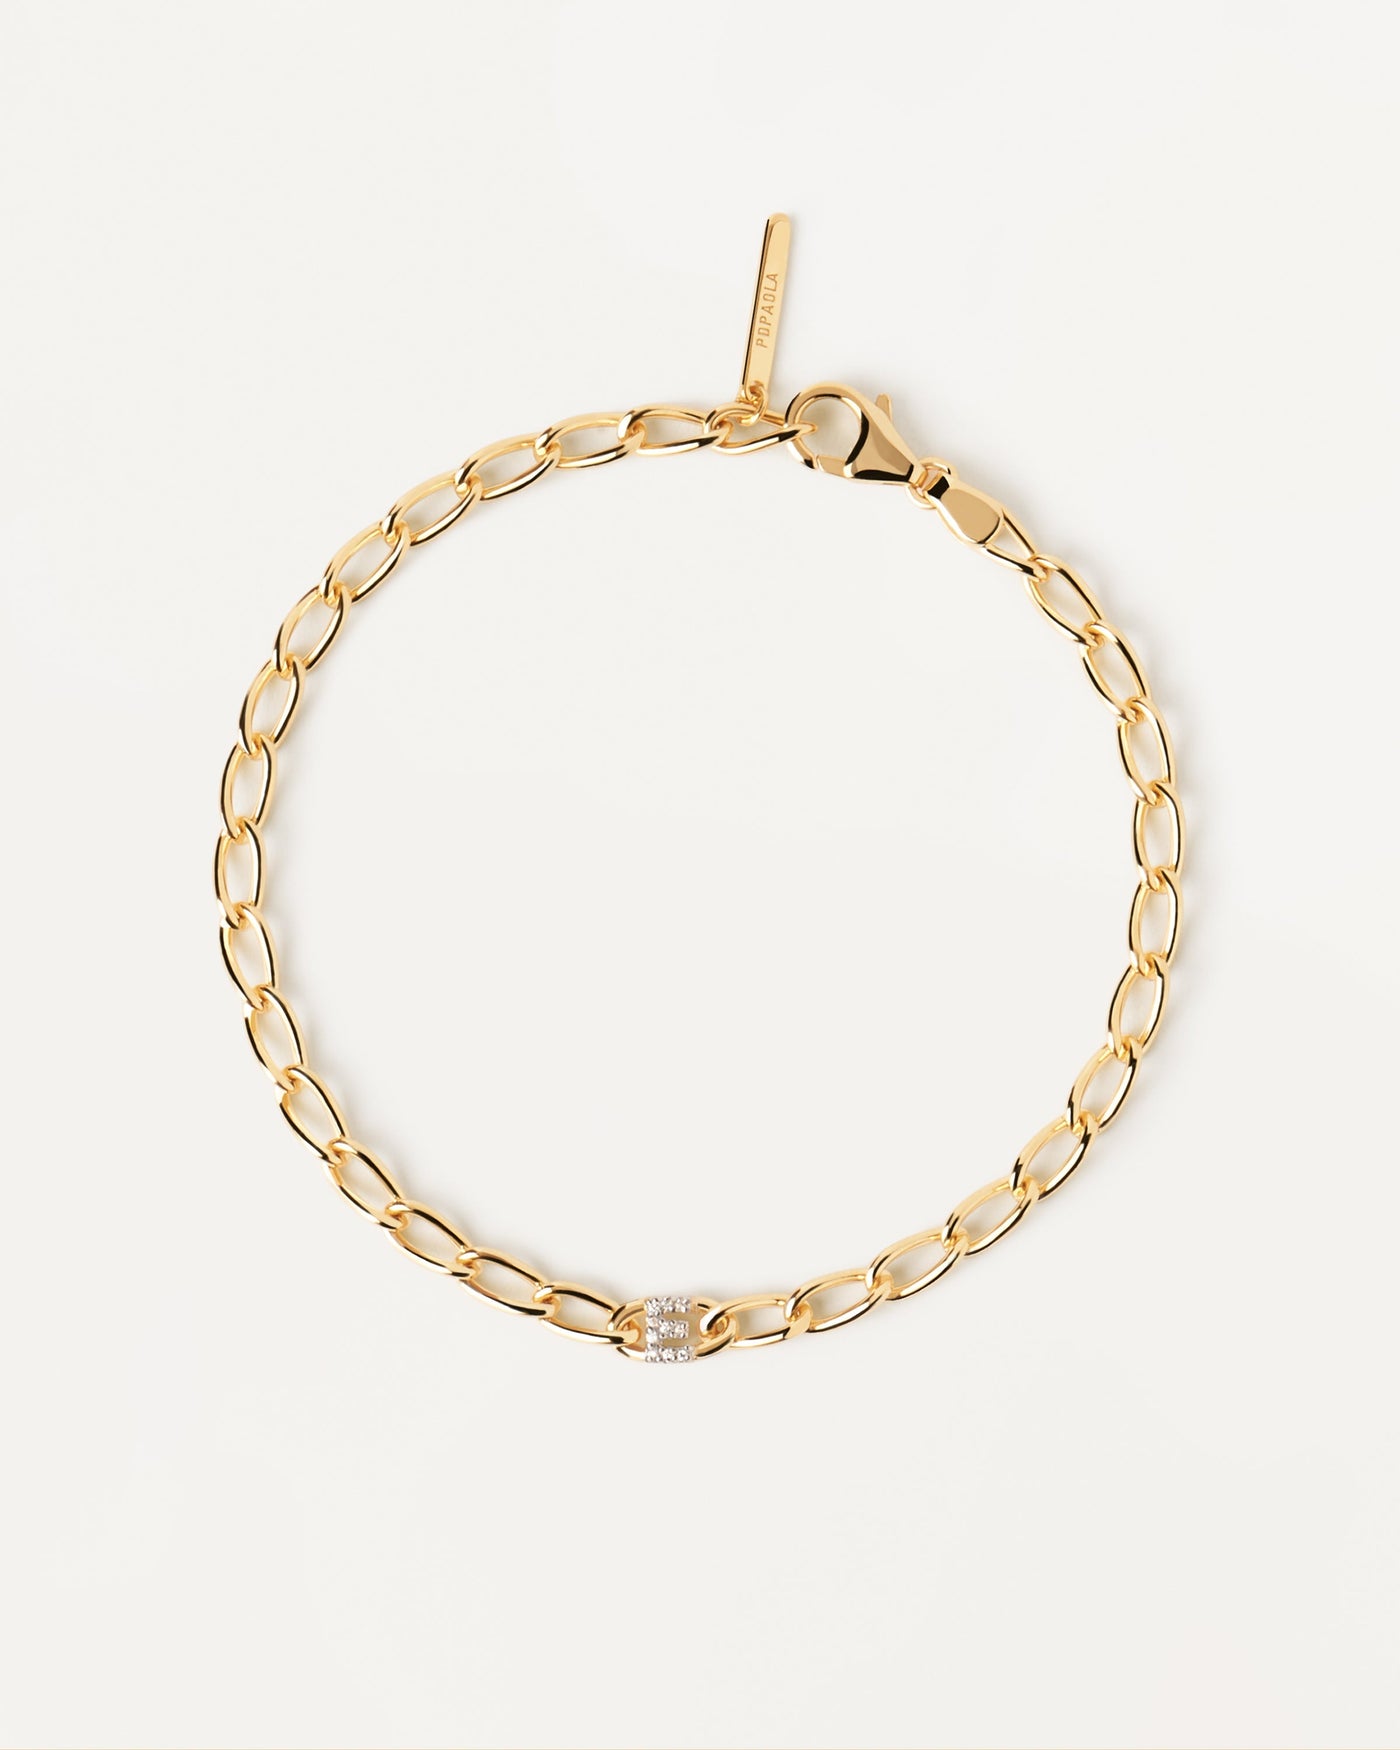 2023 Selection | Letter E Chain Bracelet. cable chain bracelet in gold-plated silver with initial E in zirconia. Get the latest arrival from PDPAOLA. Place your order safely and get this Best Seller. Free Shipping.